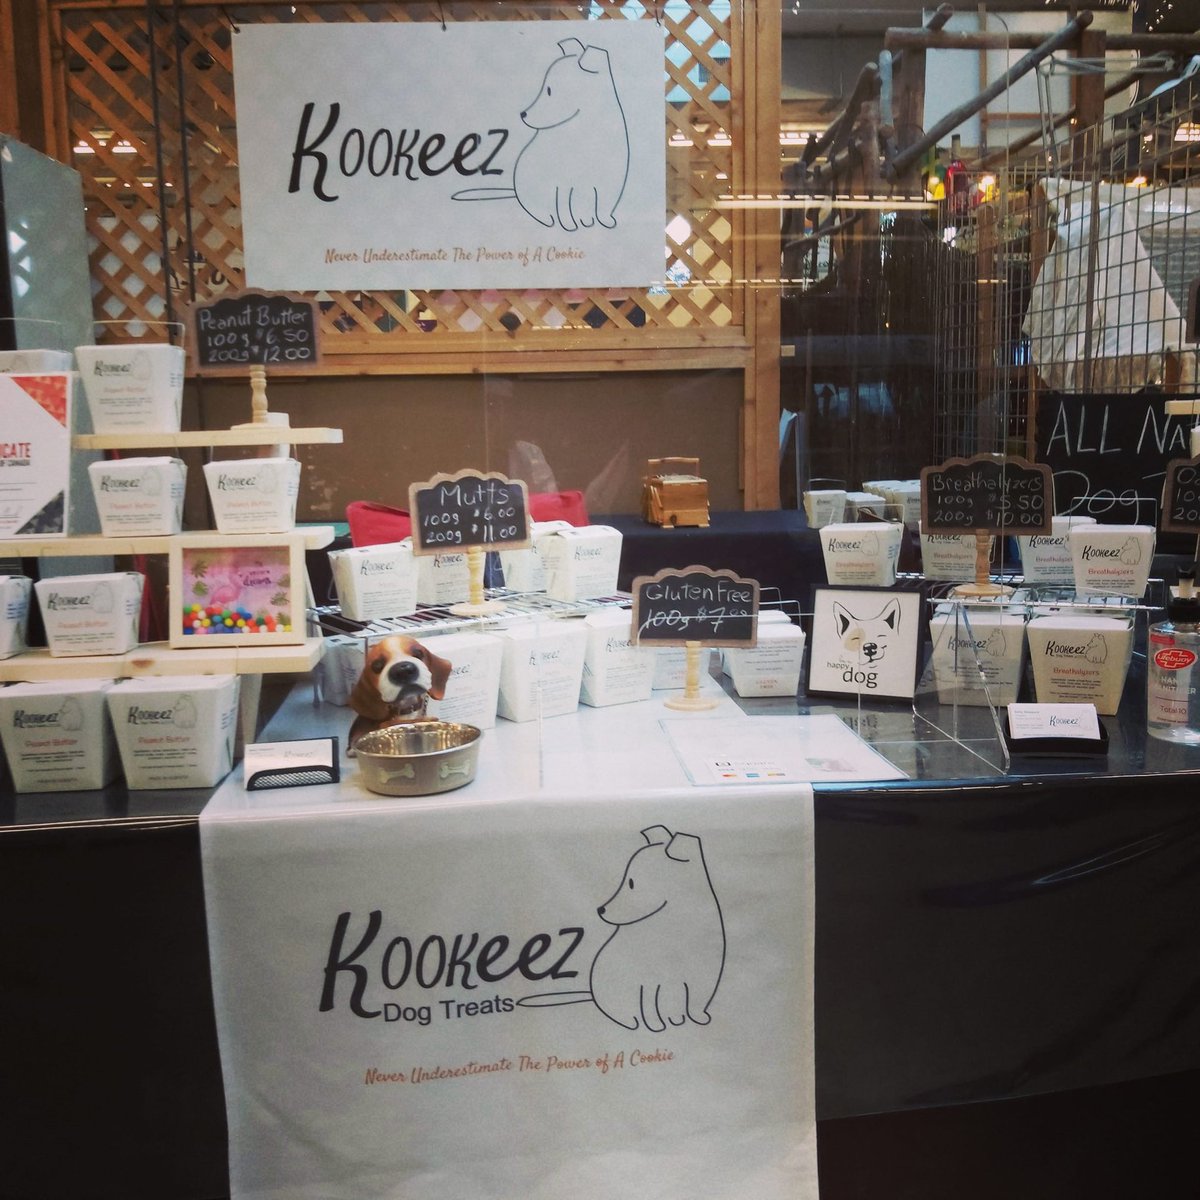 We addres @StrathconaMrkt until 3pm today. Stop by & check out or all natural dog treats.  Your pup will love you for it!❤ #Dog #myosfm #Markets #dogsoftwitter #dogfriendly #Bones #dogtreats #Yeg #yegcc #madeinEdmonton #ShopLocal #Puppies #furbabies